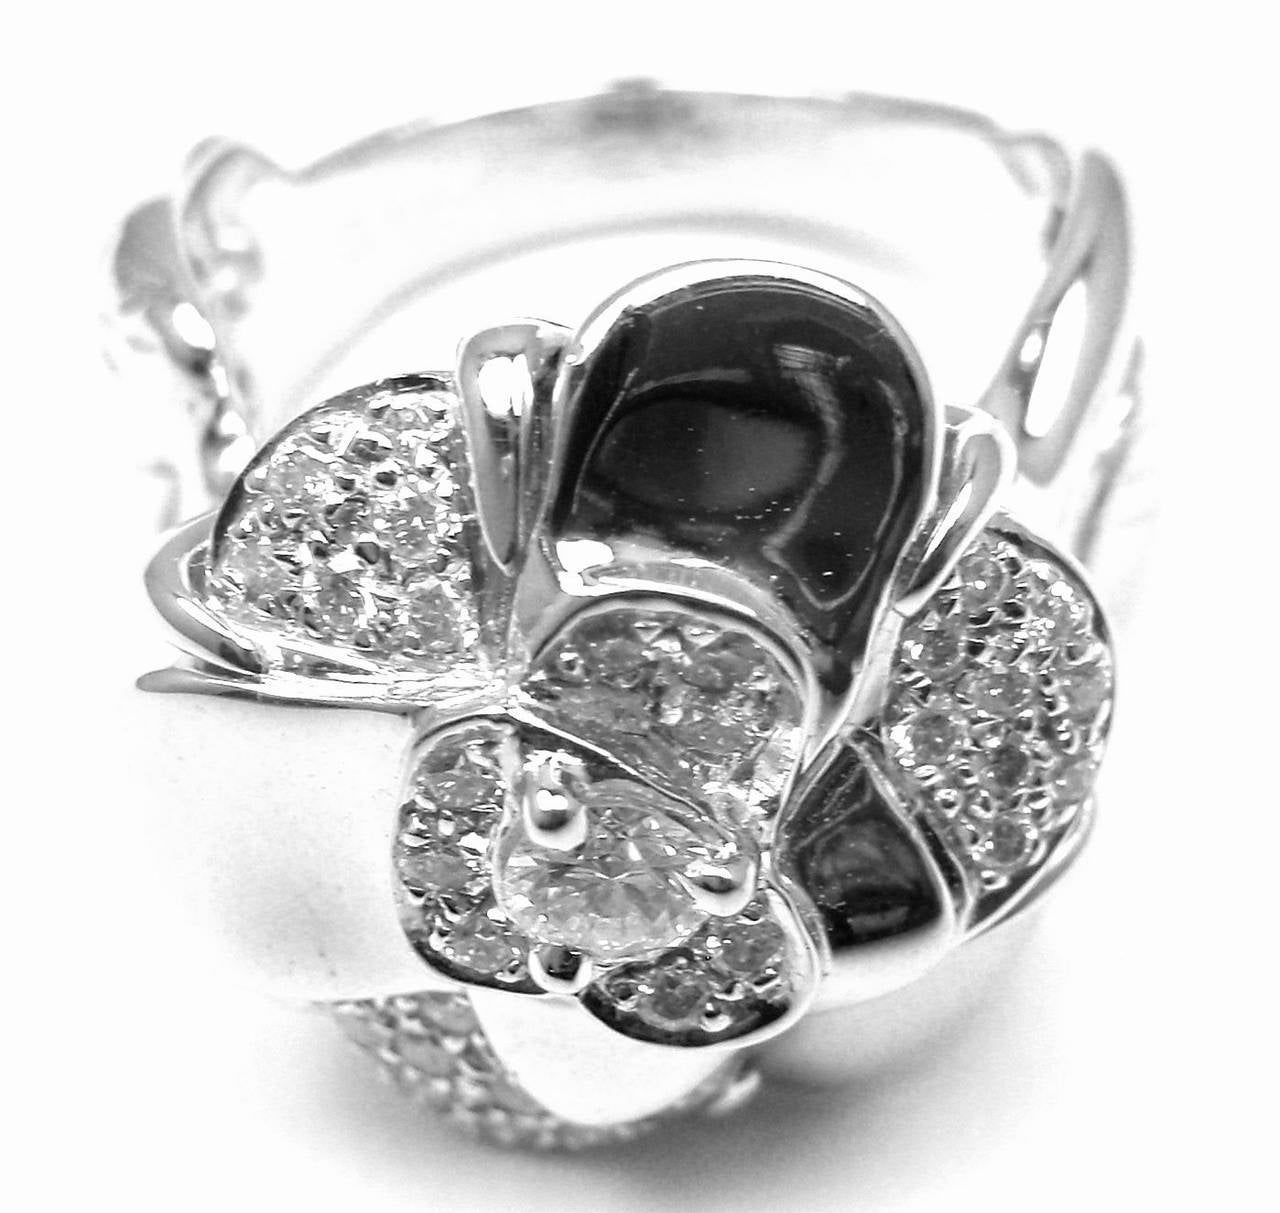 18k White Gold Diamond Camelia Flower Ring by Chanel. 
Part of Chanel's gorgeous 